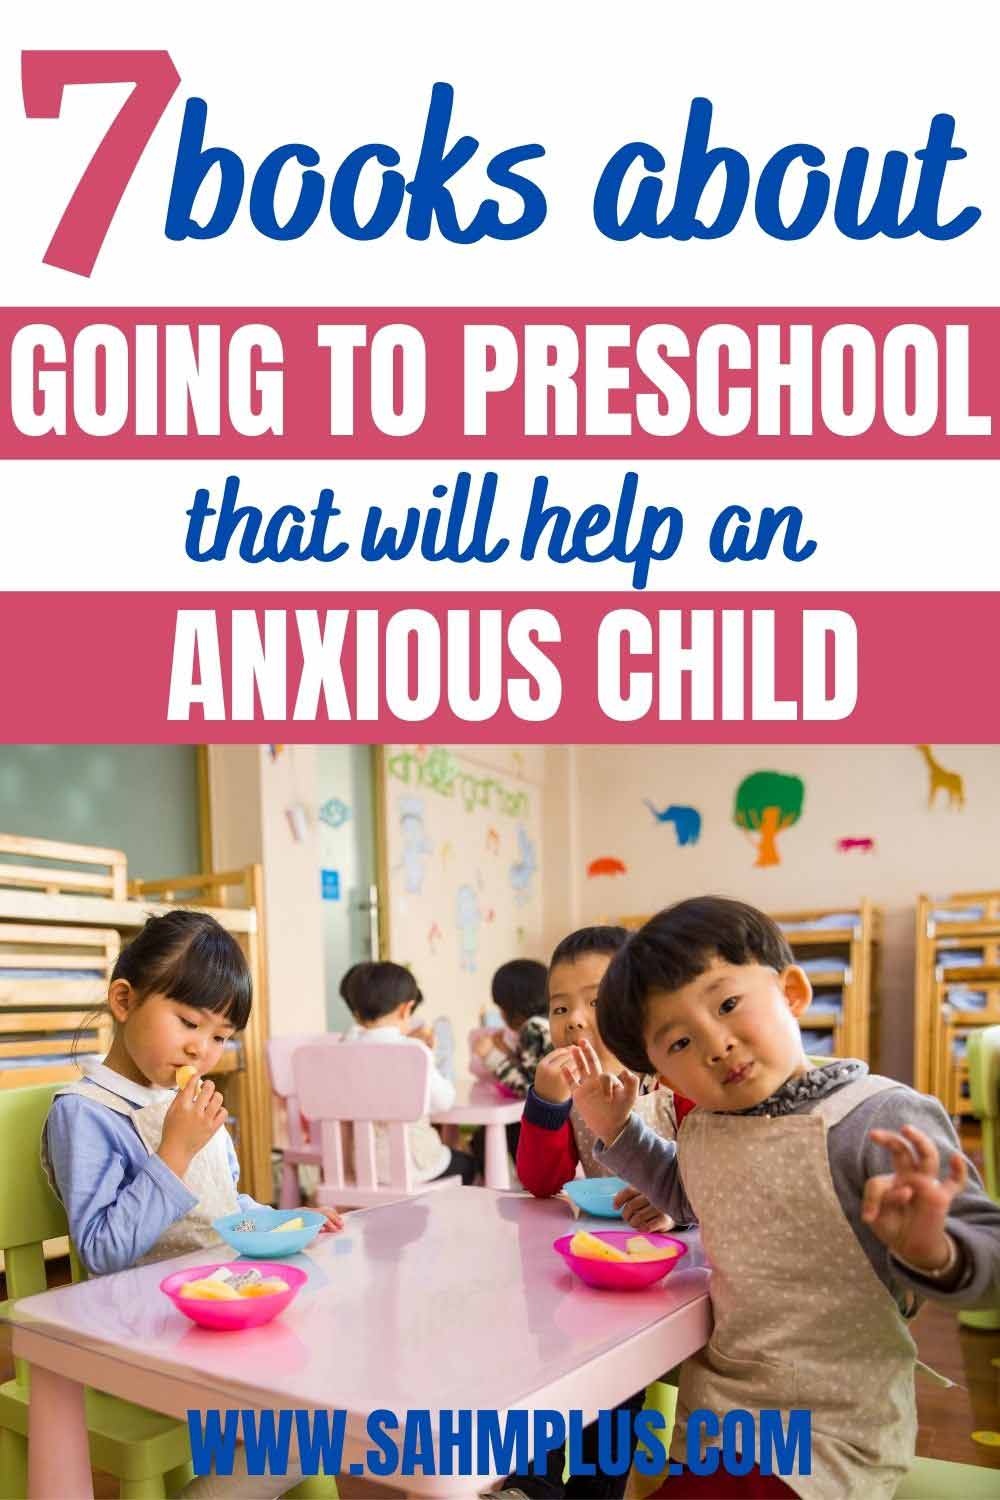 Settle anxiety about going to preschool with 7 awesome books about preschool for an uncertain child